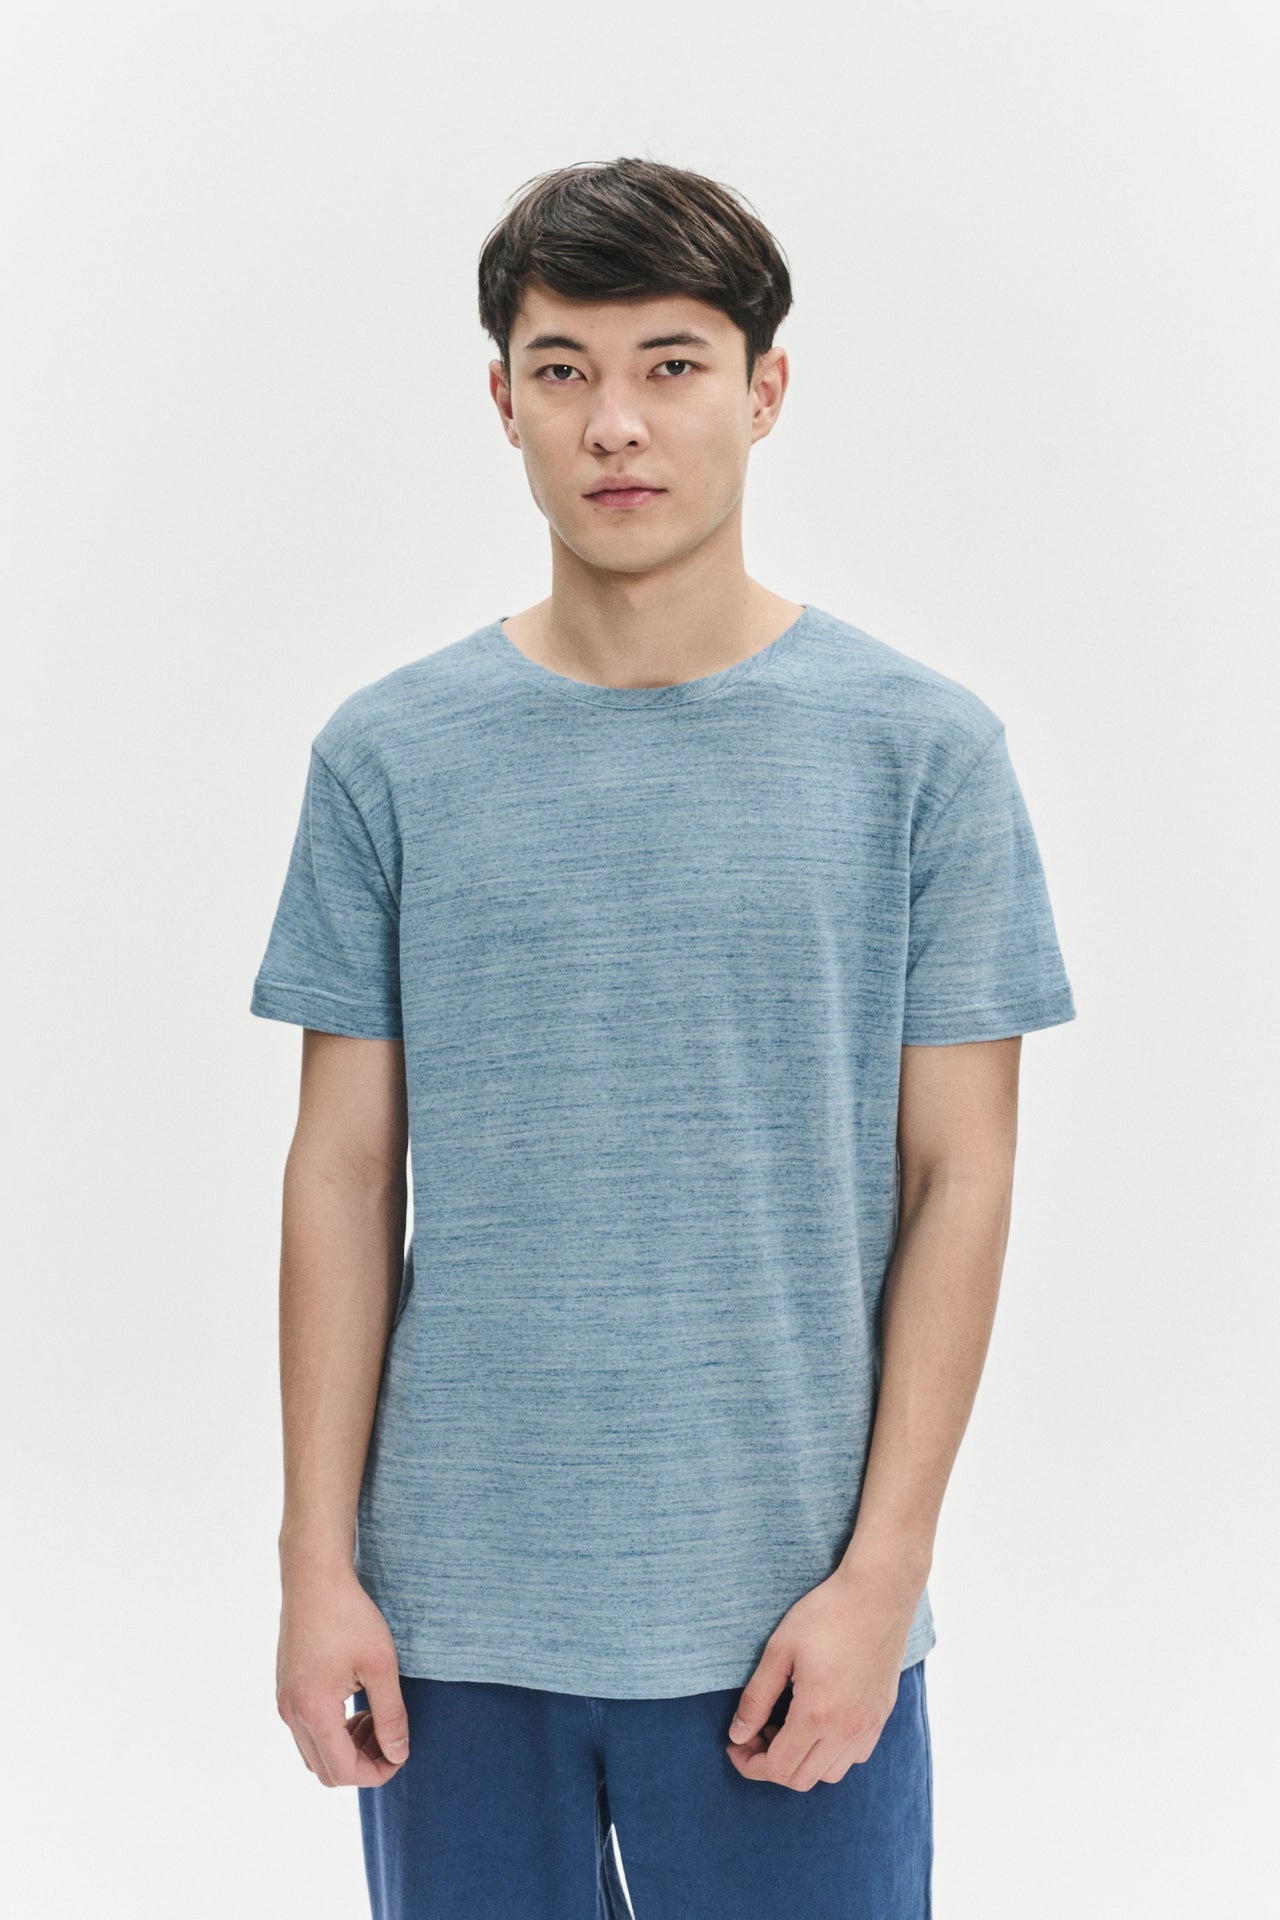 T-Shirt in a Light Blue Slow-Knit Soft Japanese Cotton Jersey